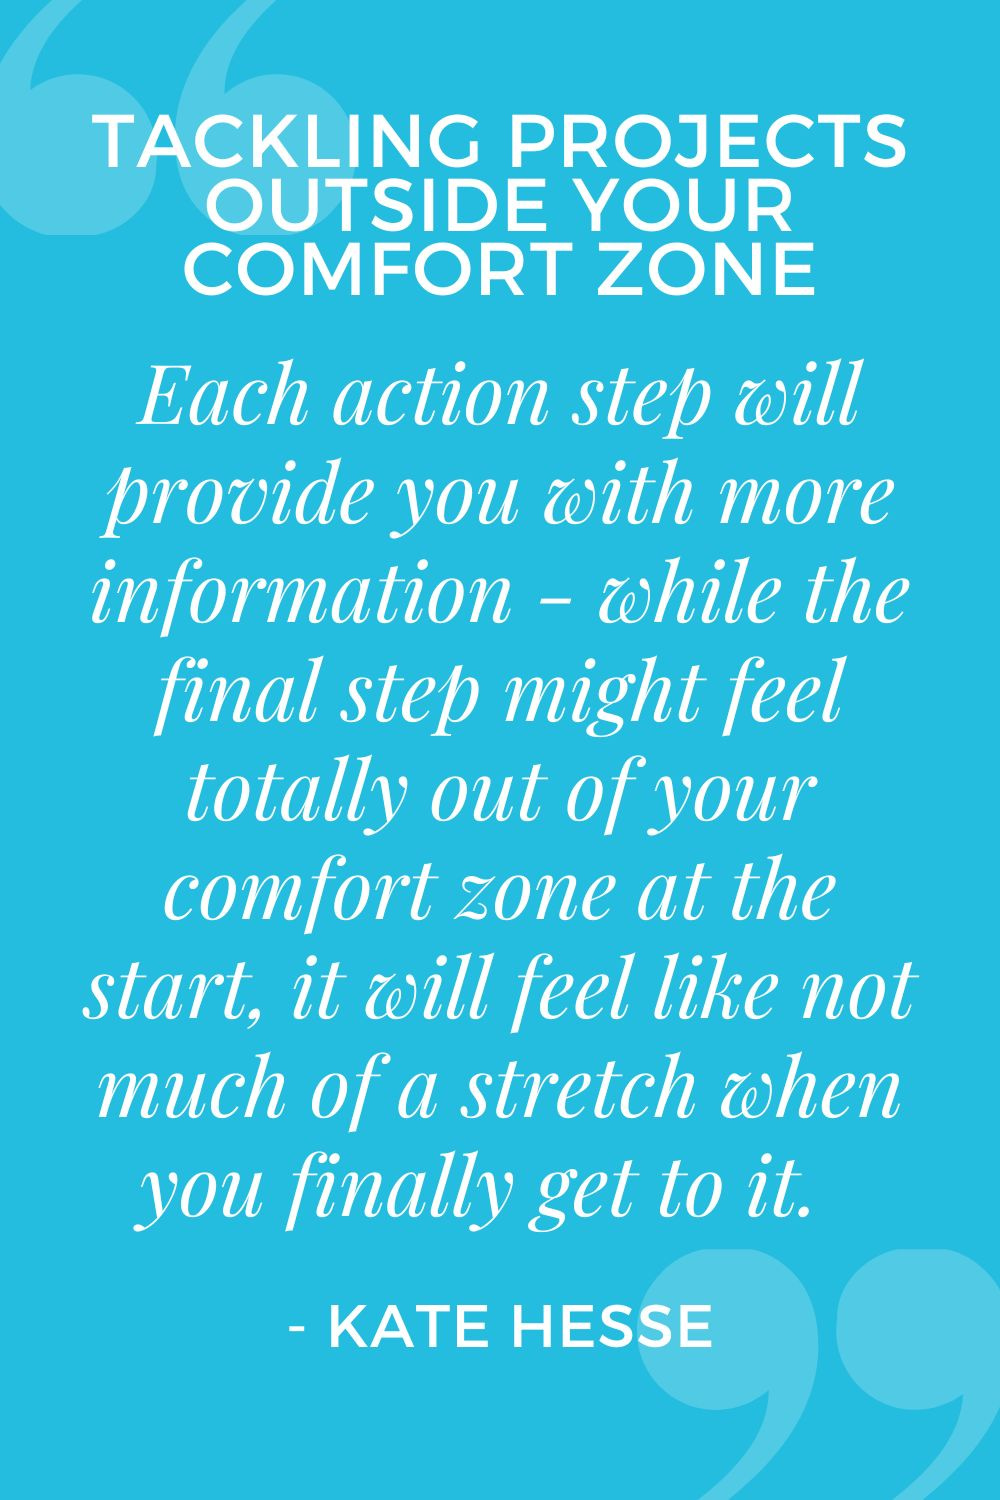 Each action step will provide you with more information - while the final step might feel totally out of your comfort zone at the start, it will feel like not much of a stretch when you finally get to it.